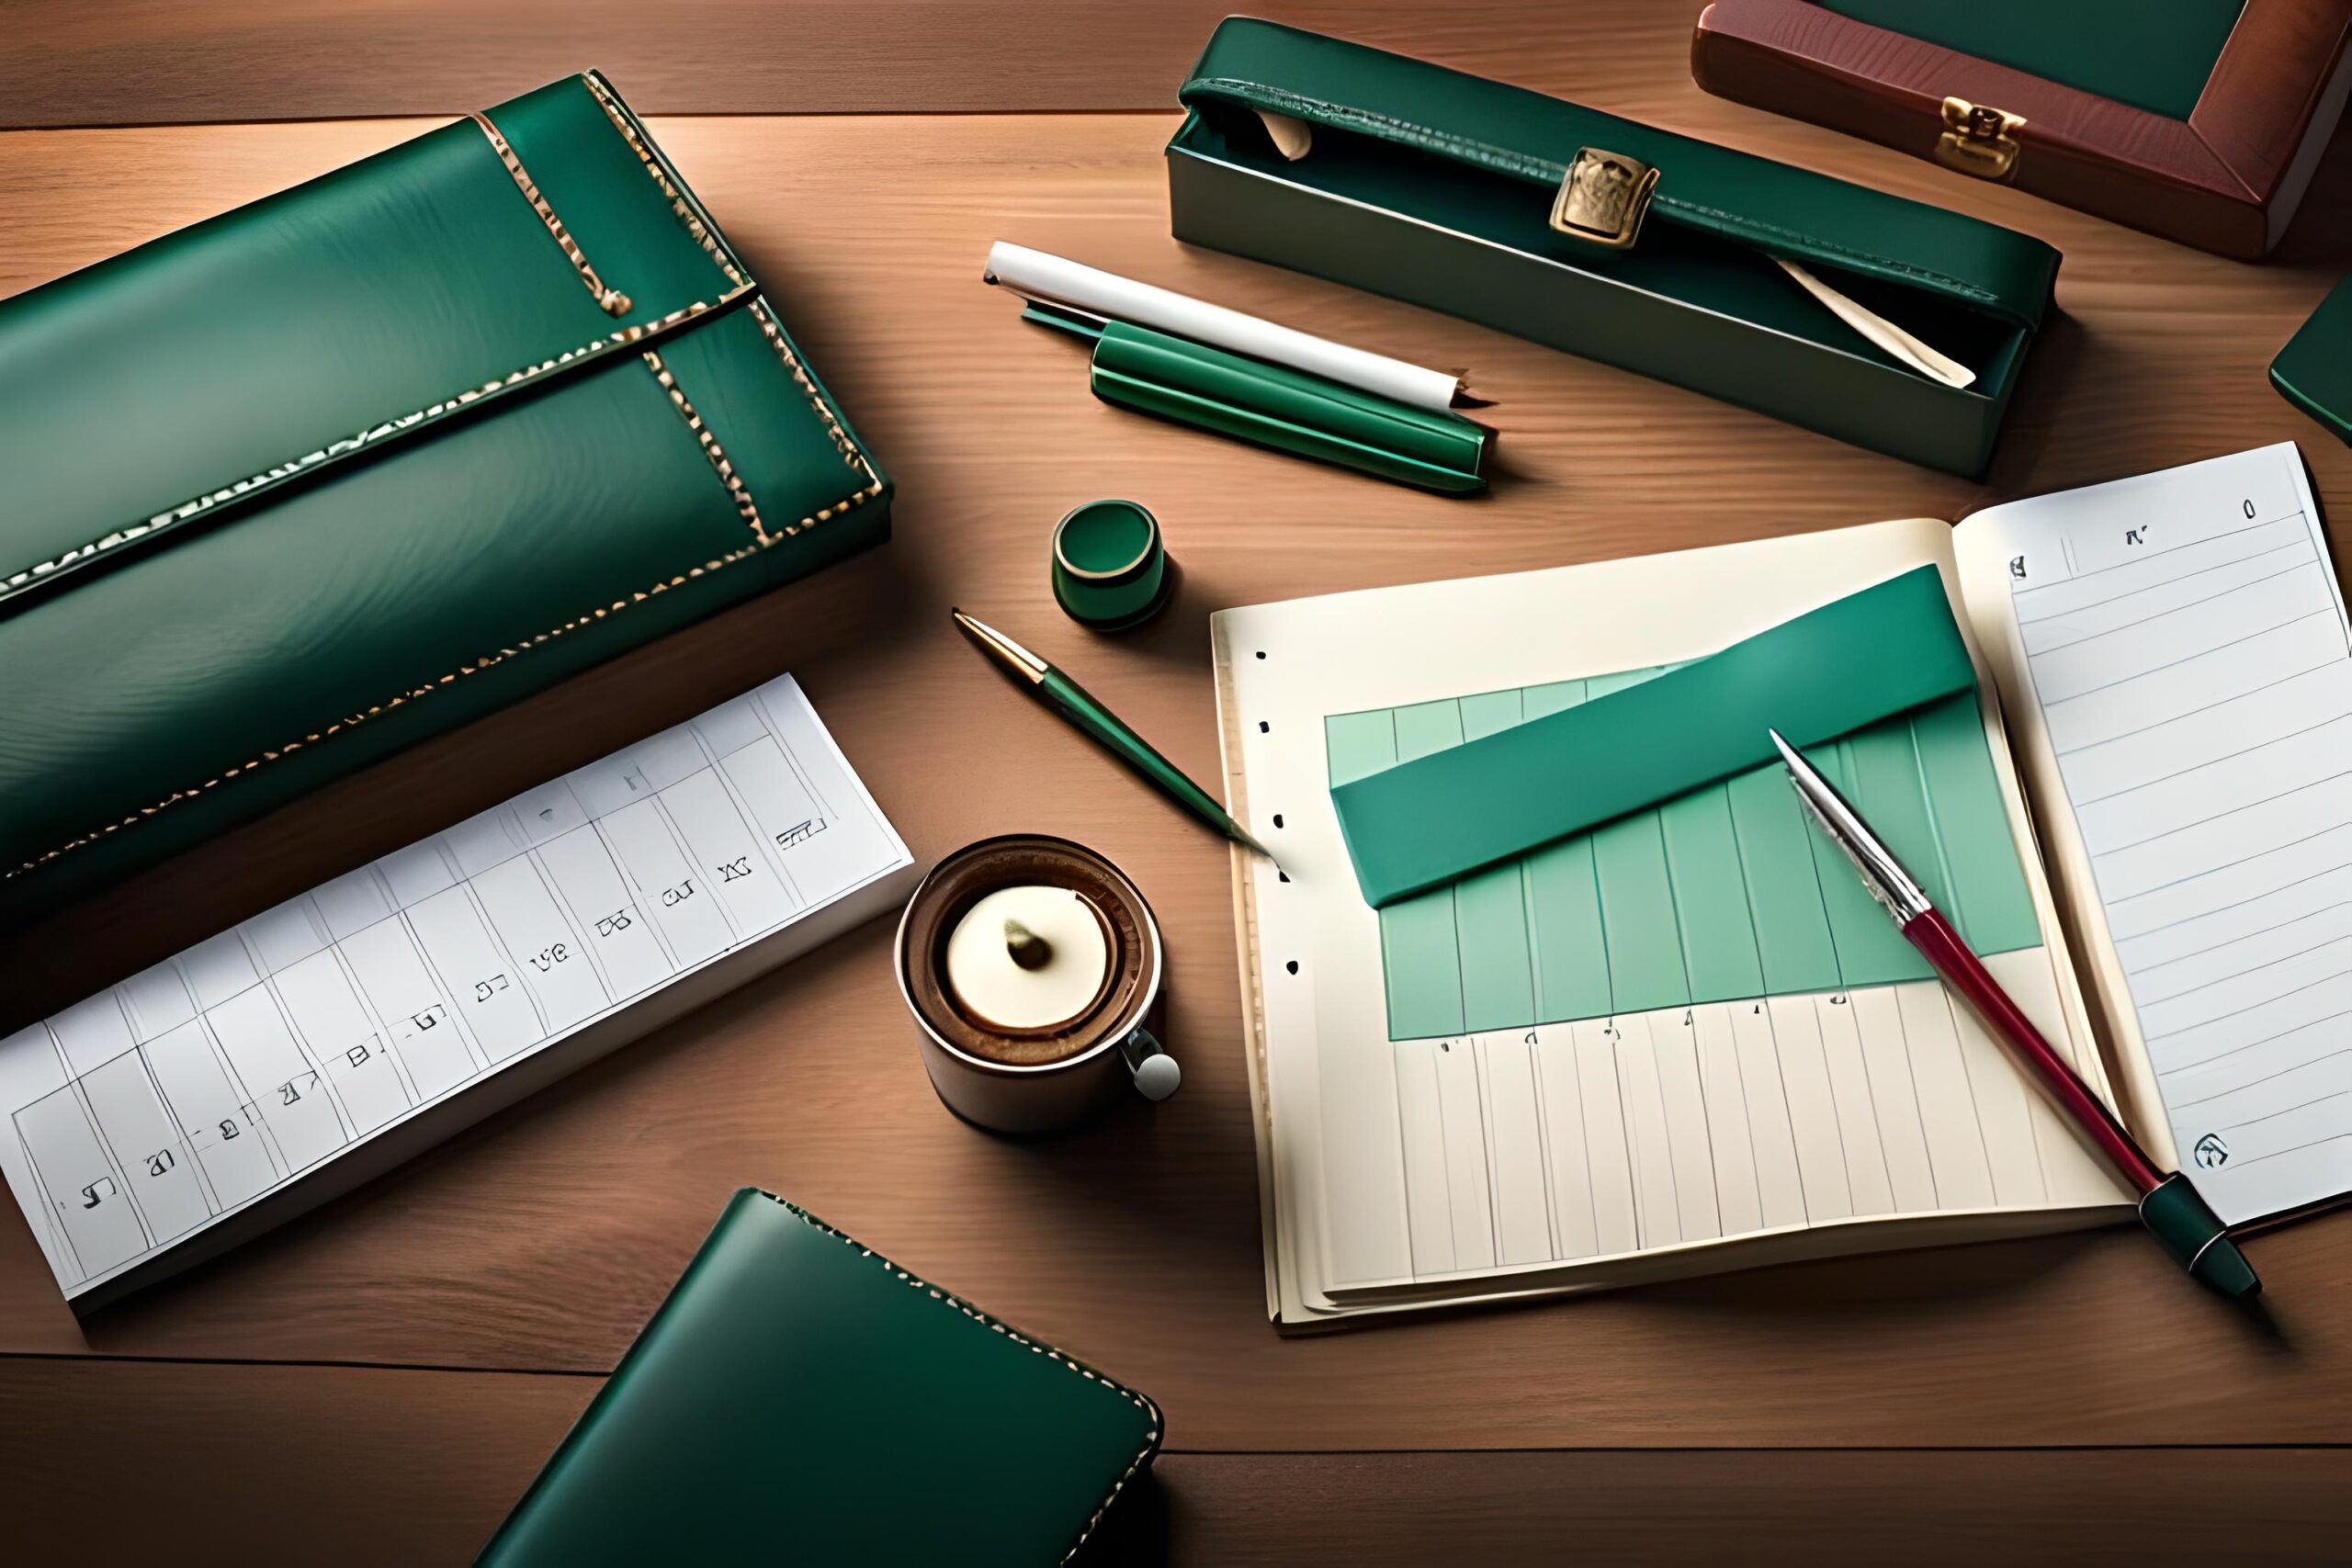 Green stationery on a table, green leather pouch, green pen holder, design consistency in rand design.